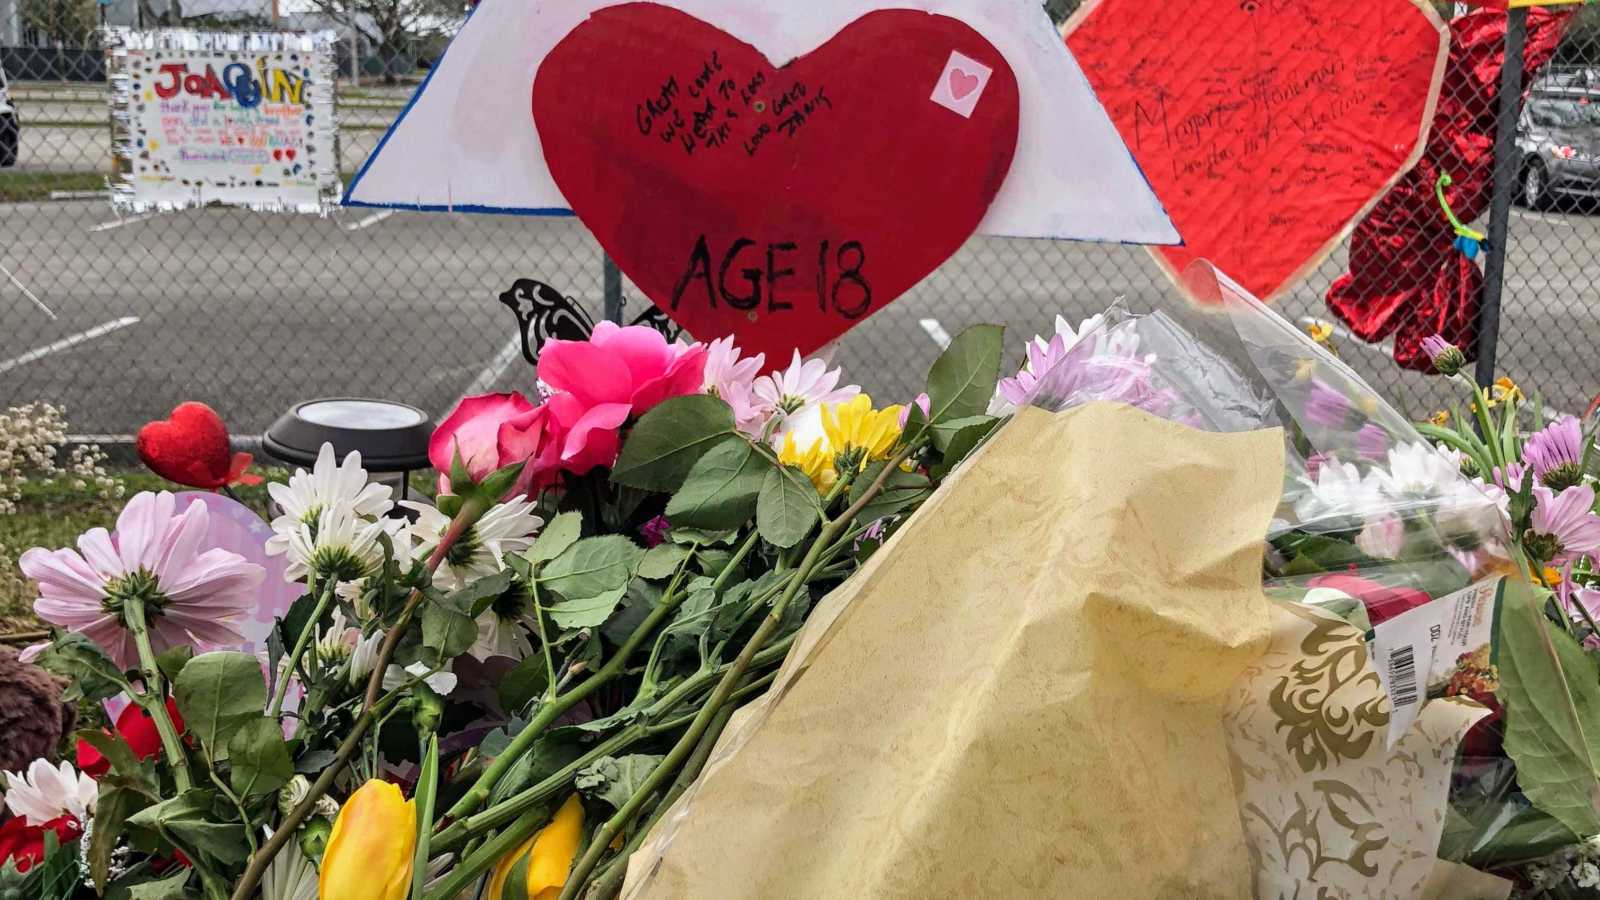 pile of assorted flowers next to fence that has heart poster with "age 18" written on it